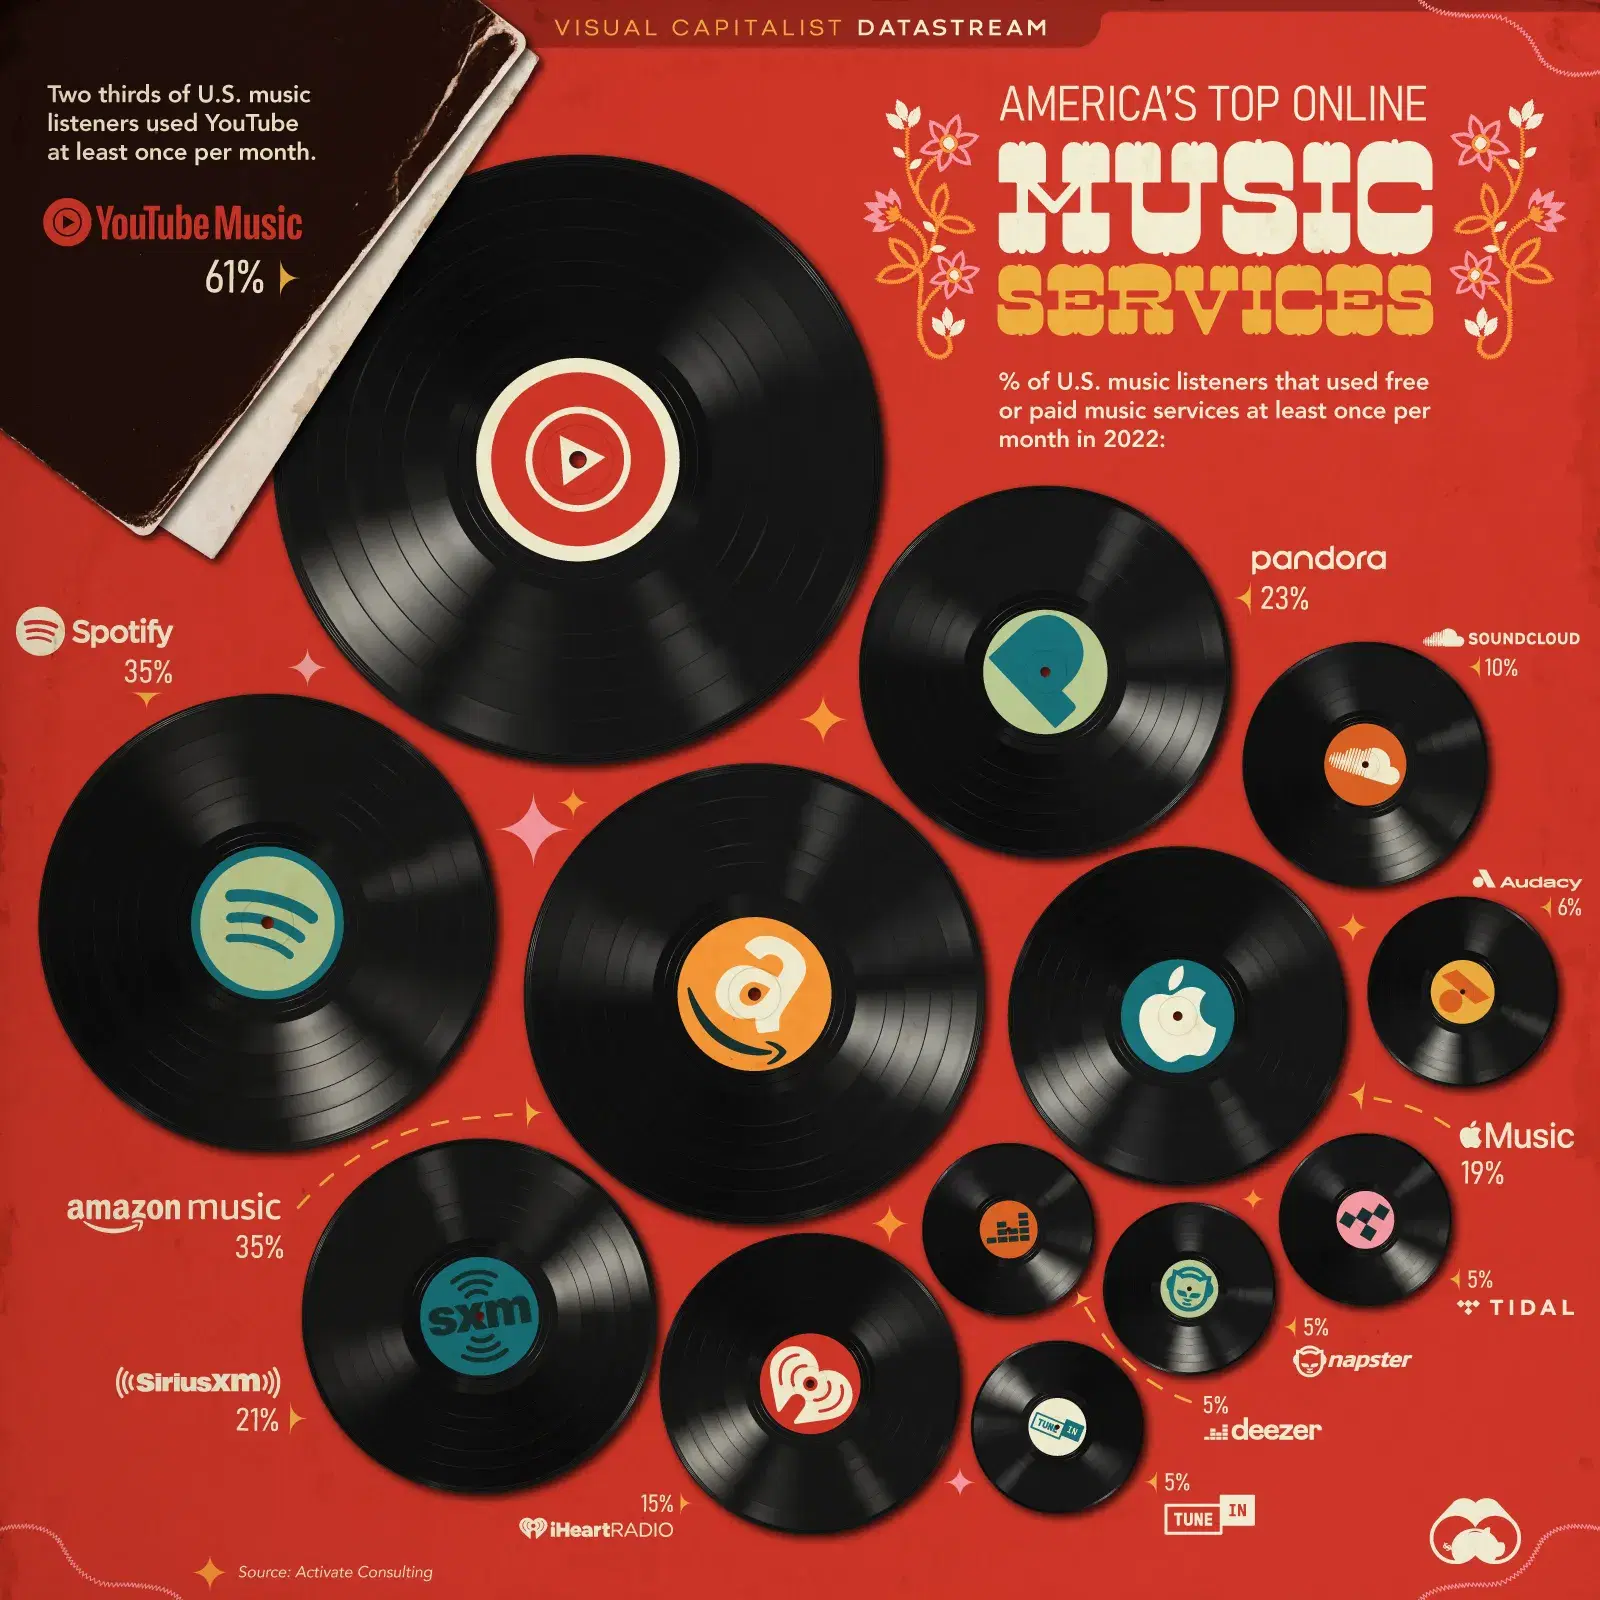 Ranked: The Top Online Music Services in the U.S. by Monthly Users